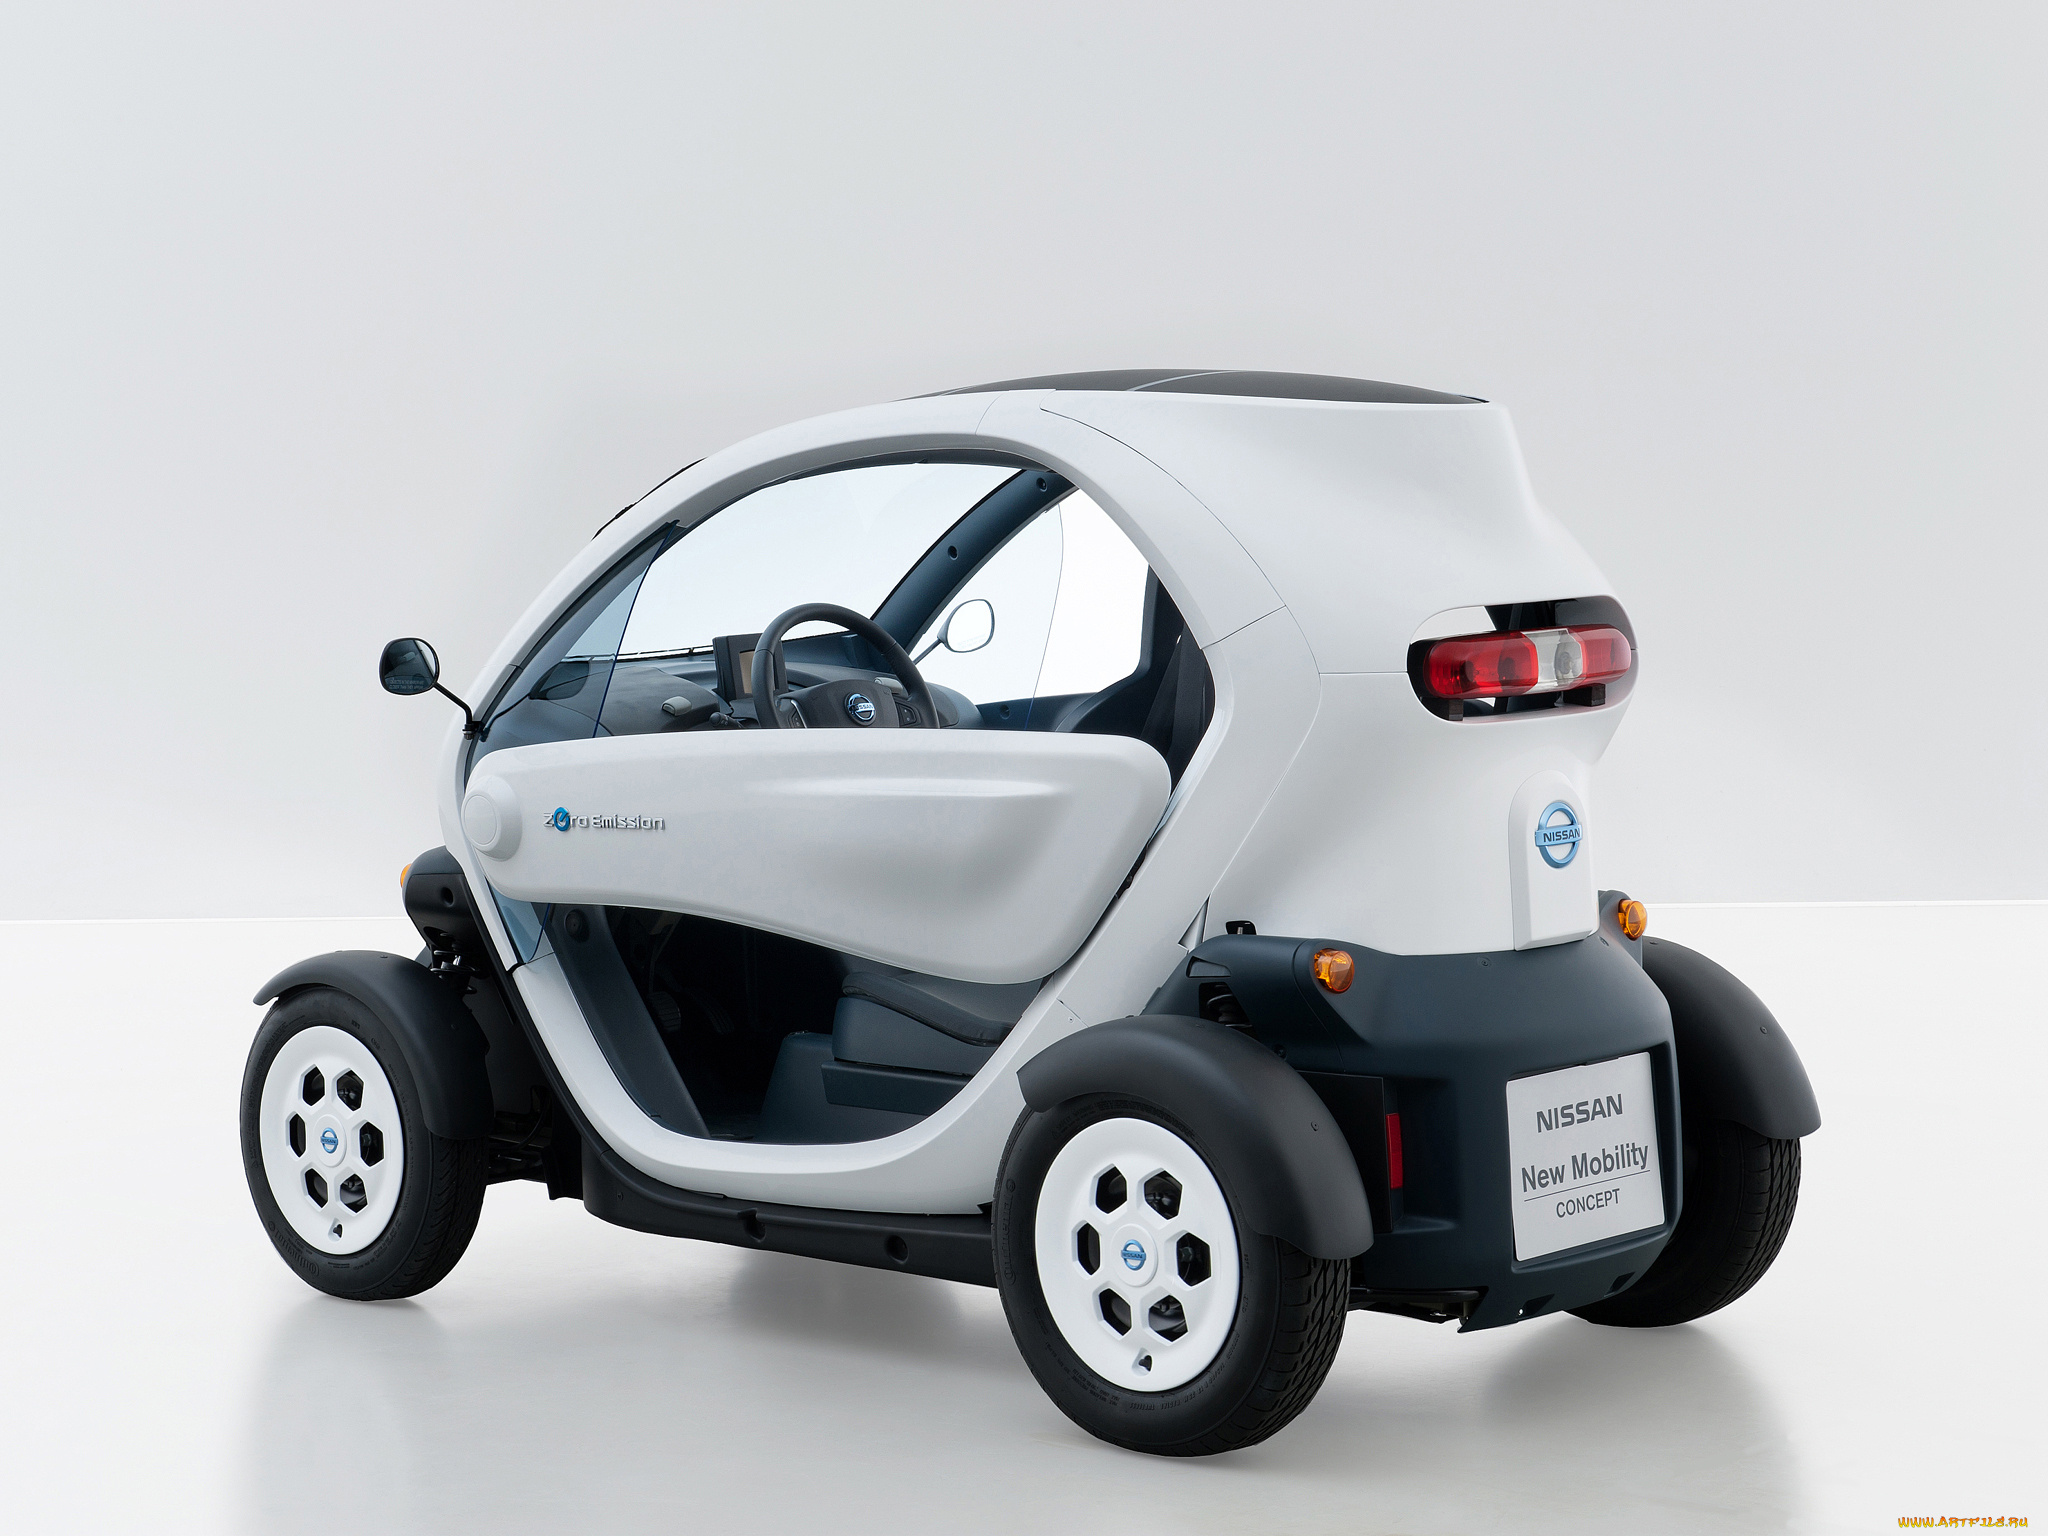 nissan, new, mobility, concept, 2011, автомобили, nissan, datsun, 2011, concept, new, mobility